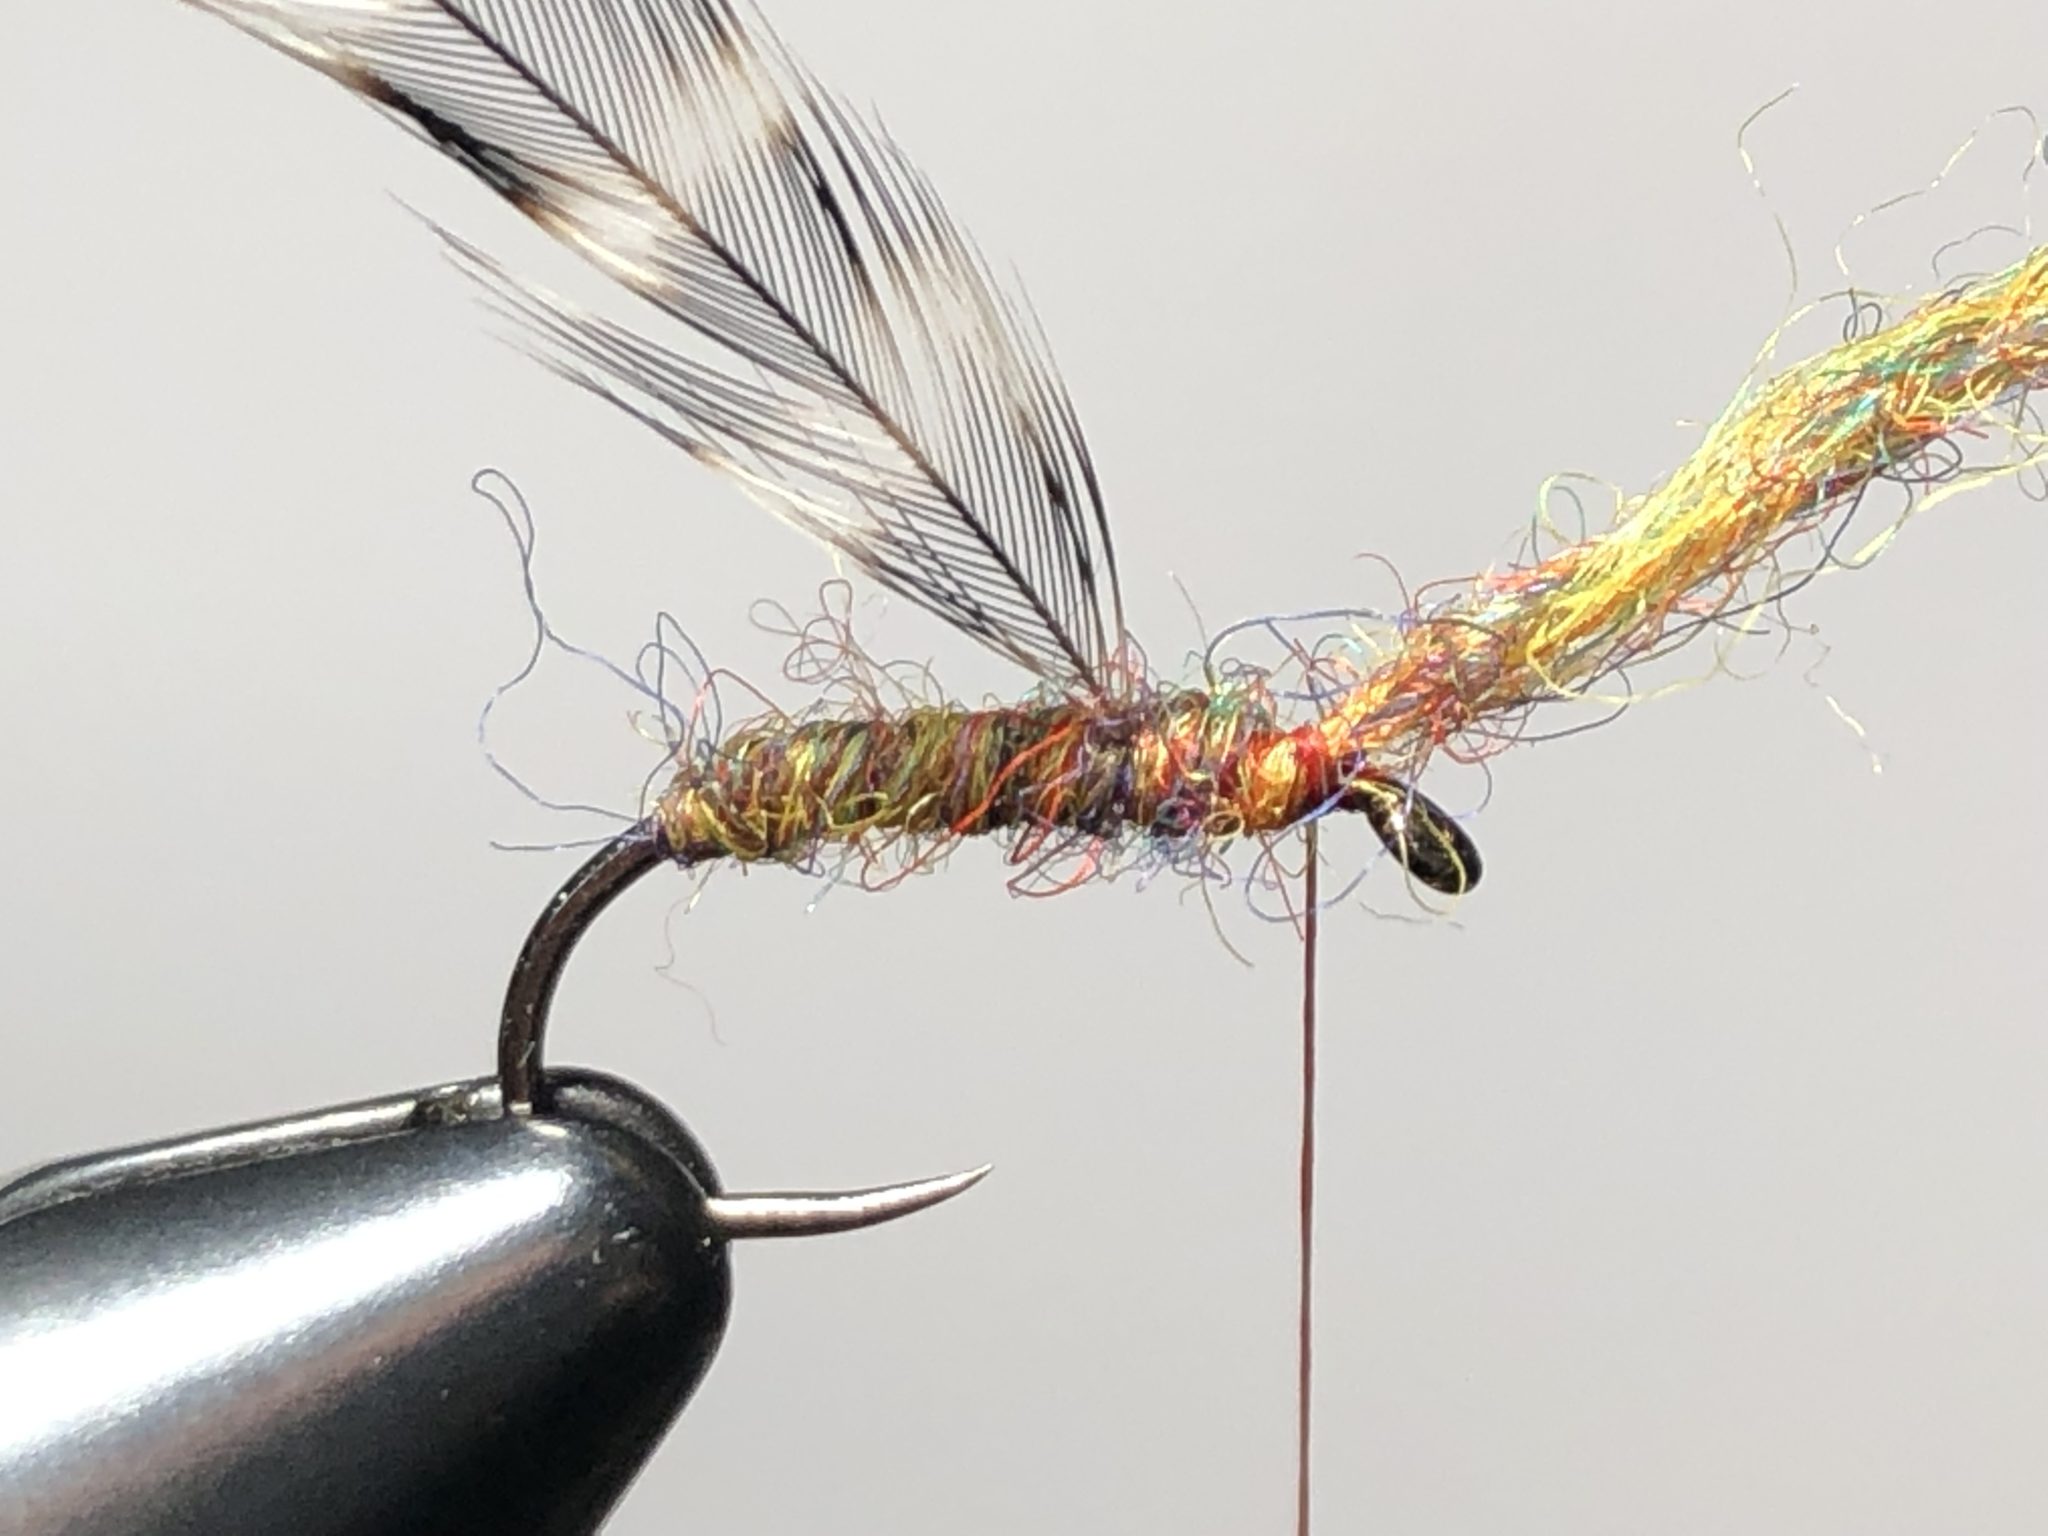 5 Good Reasons to Tie Your Own Flies